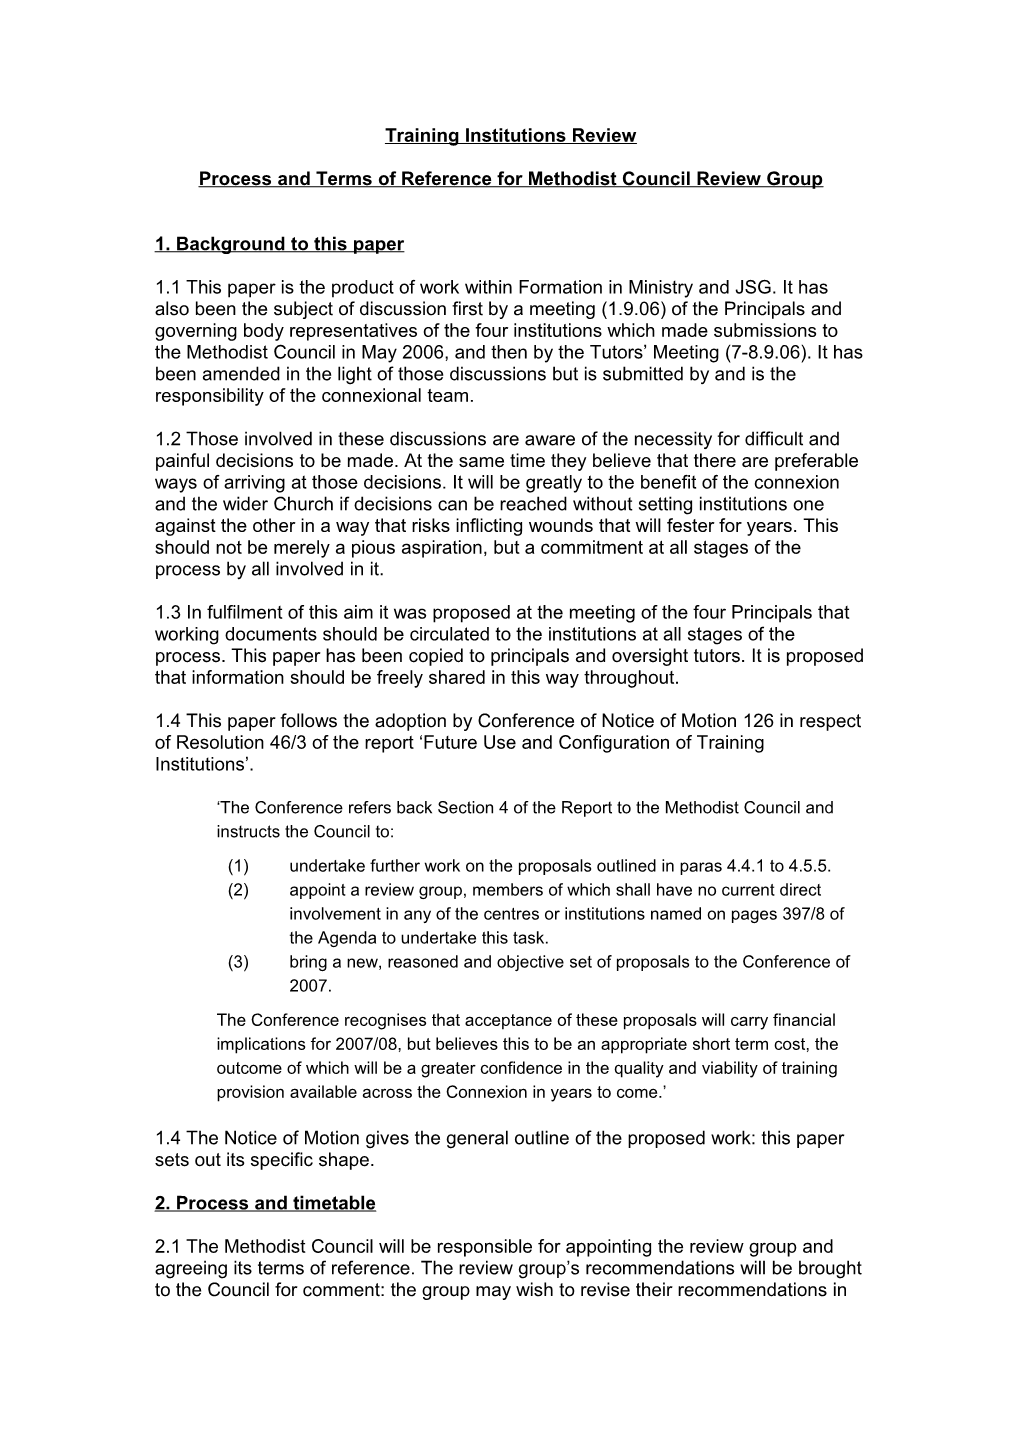 Draft Terms of Reference for Methodist Council Review Group